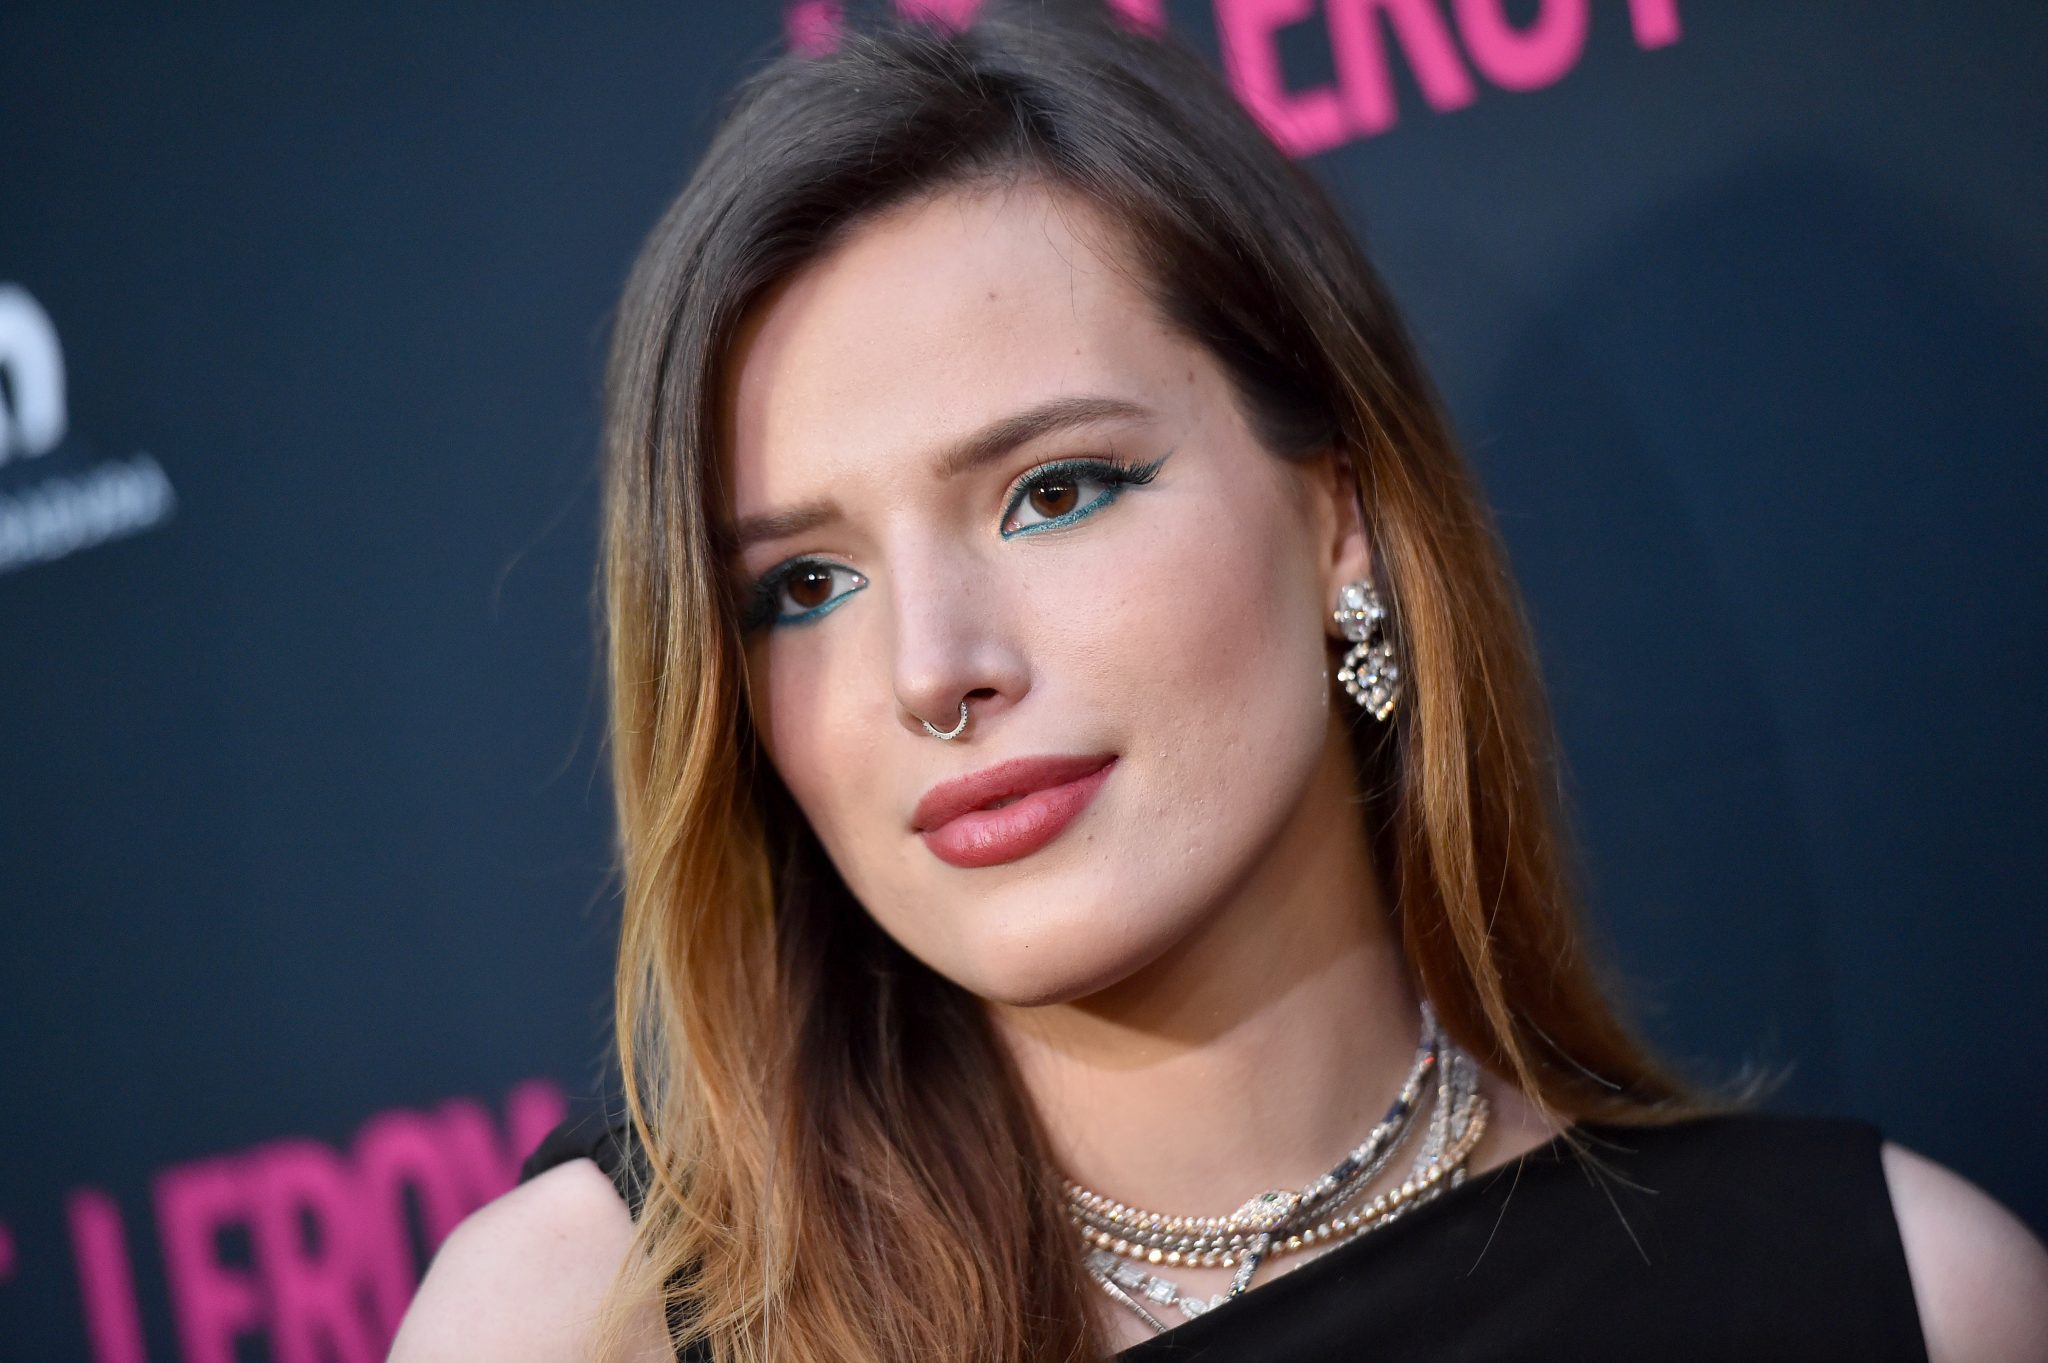 Bella Thorne Responds To Revenge Porn With Nude Photos On Twitter